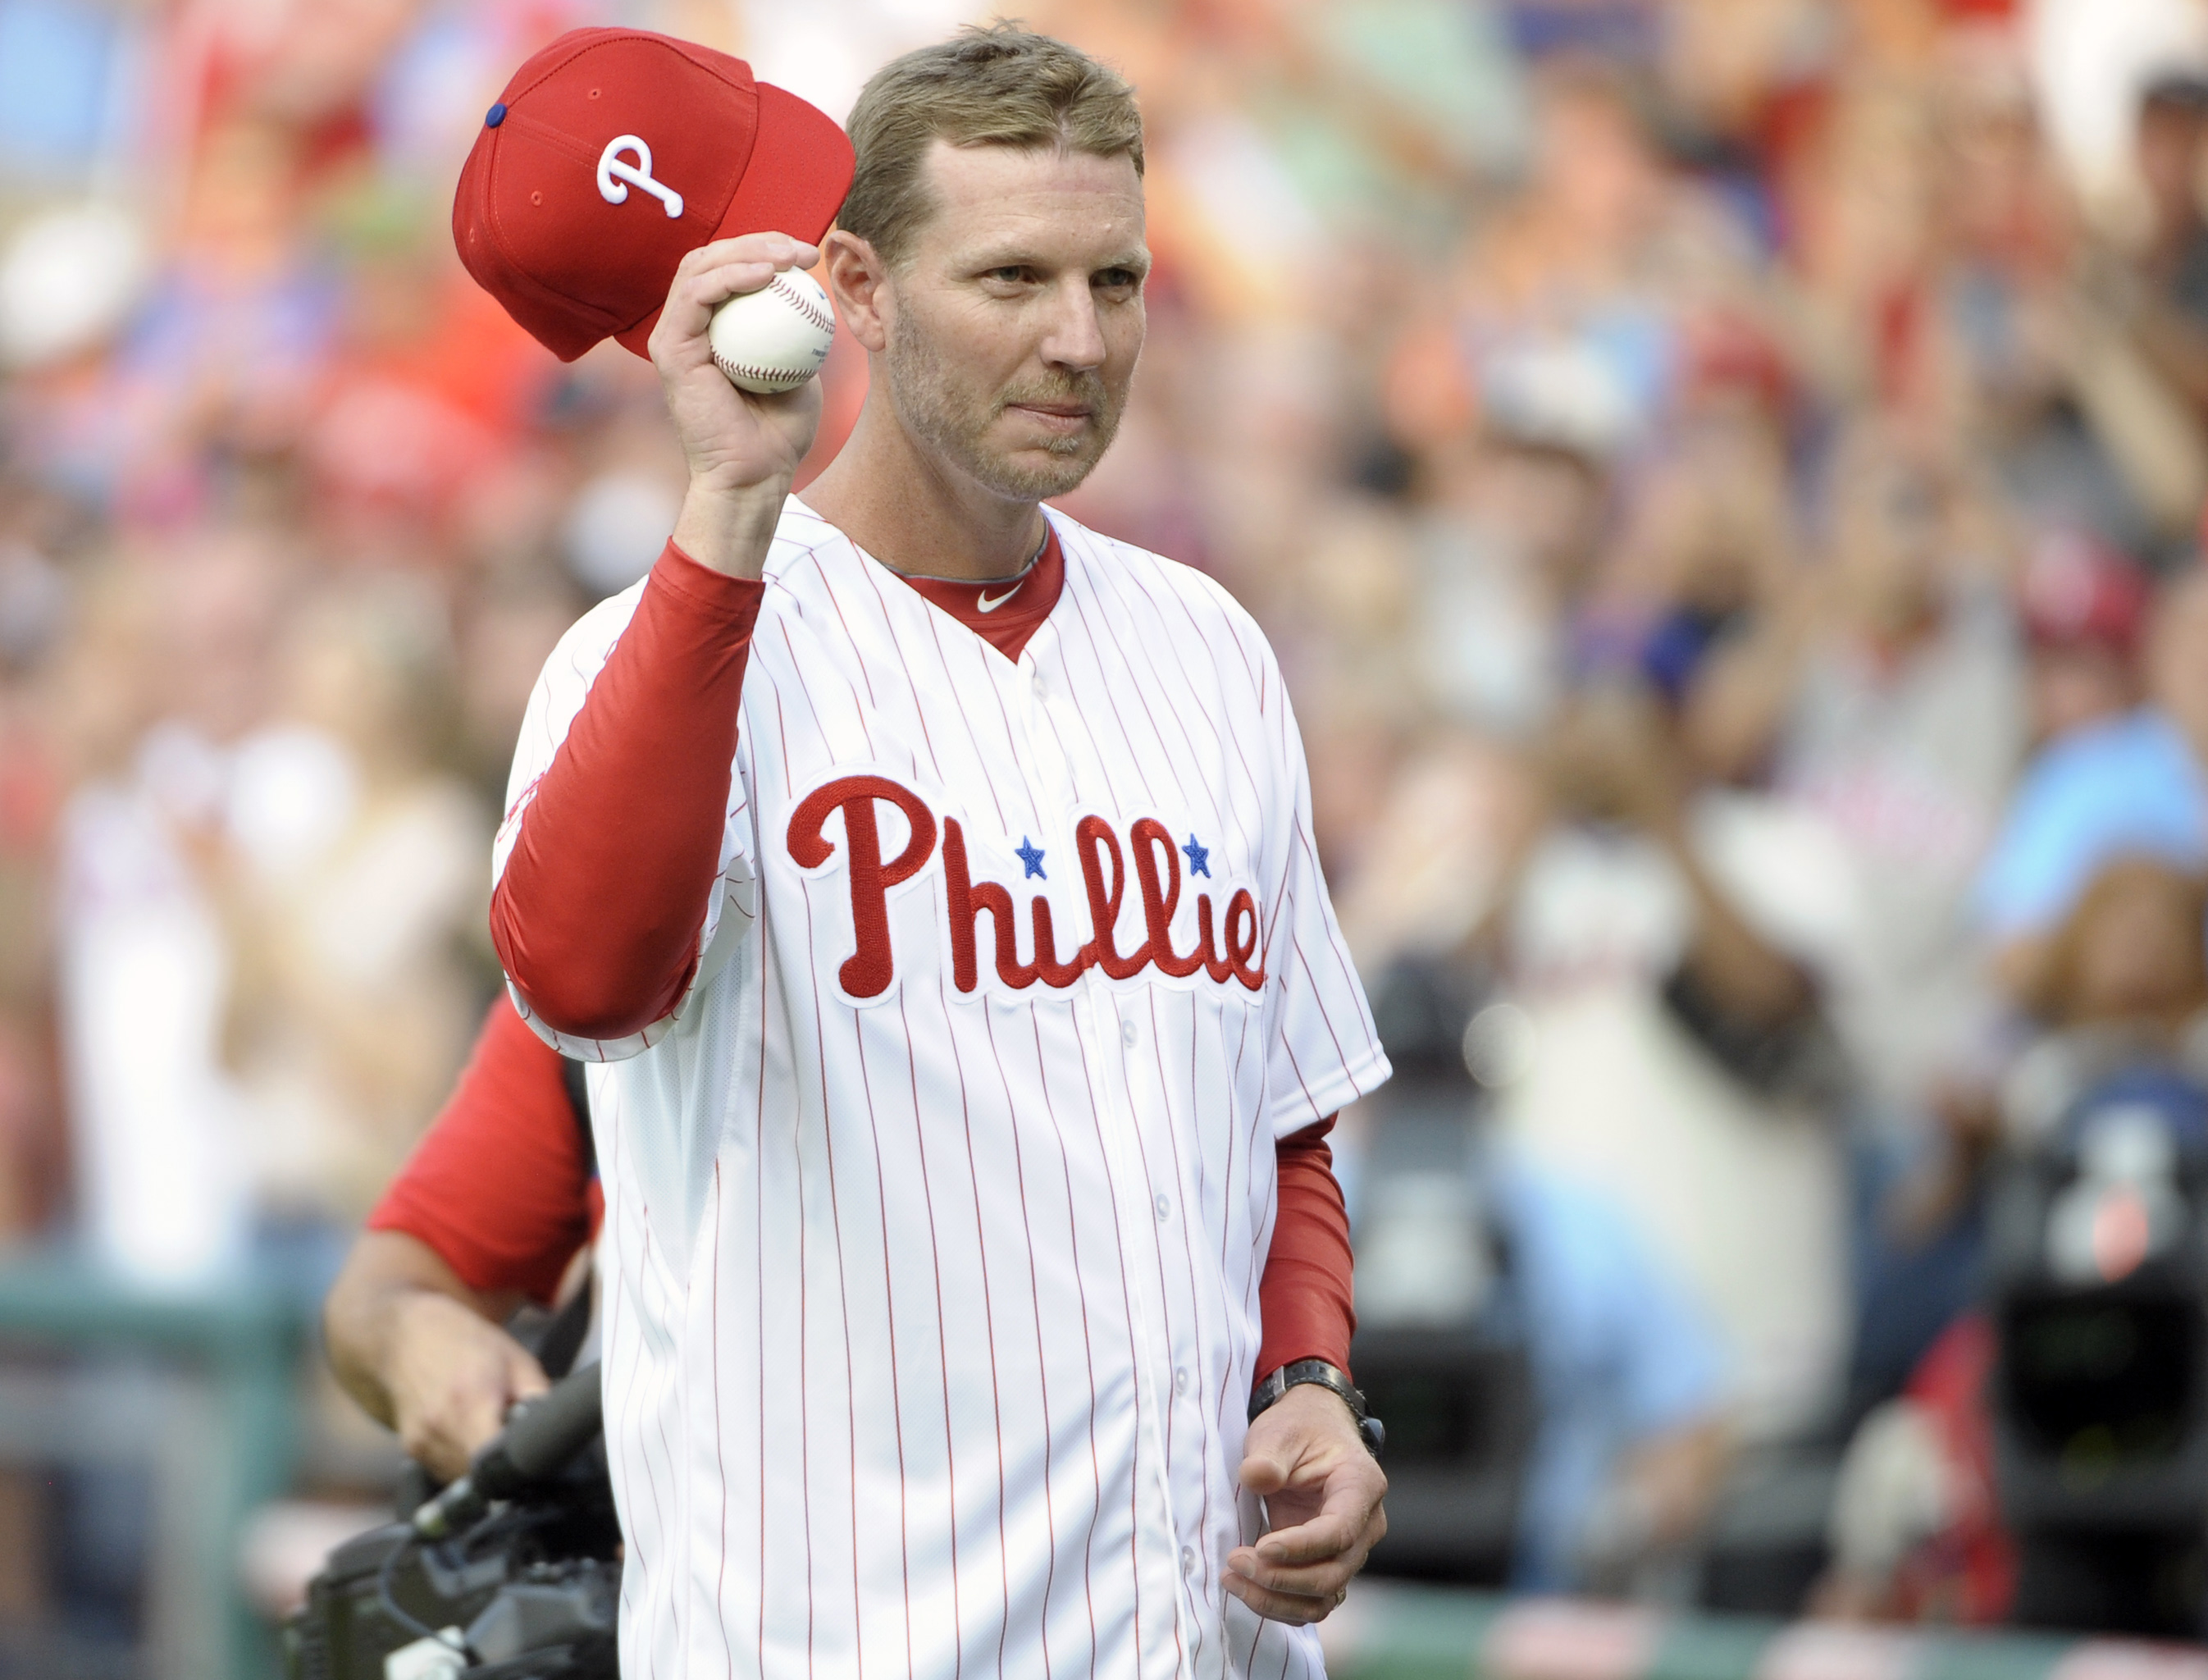 Roy Halladay Killed in Plane Crash Over Gulf of Mexico